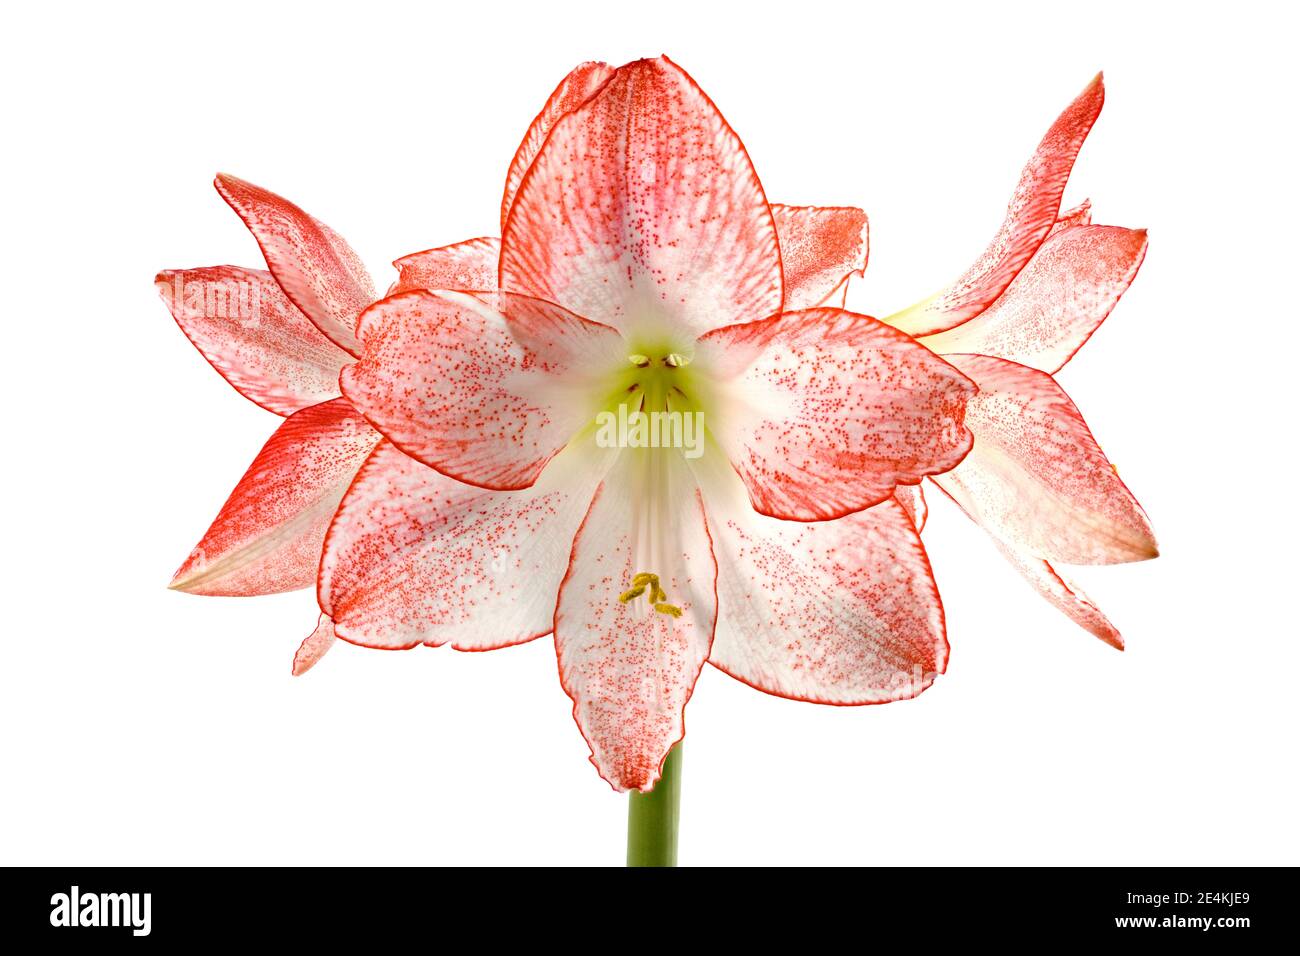 Close up of beautiful pink and white Amaryllis flowers photographed against a plain white background. The Amaryllis variety is called Apple Blossom Stock Photo